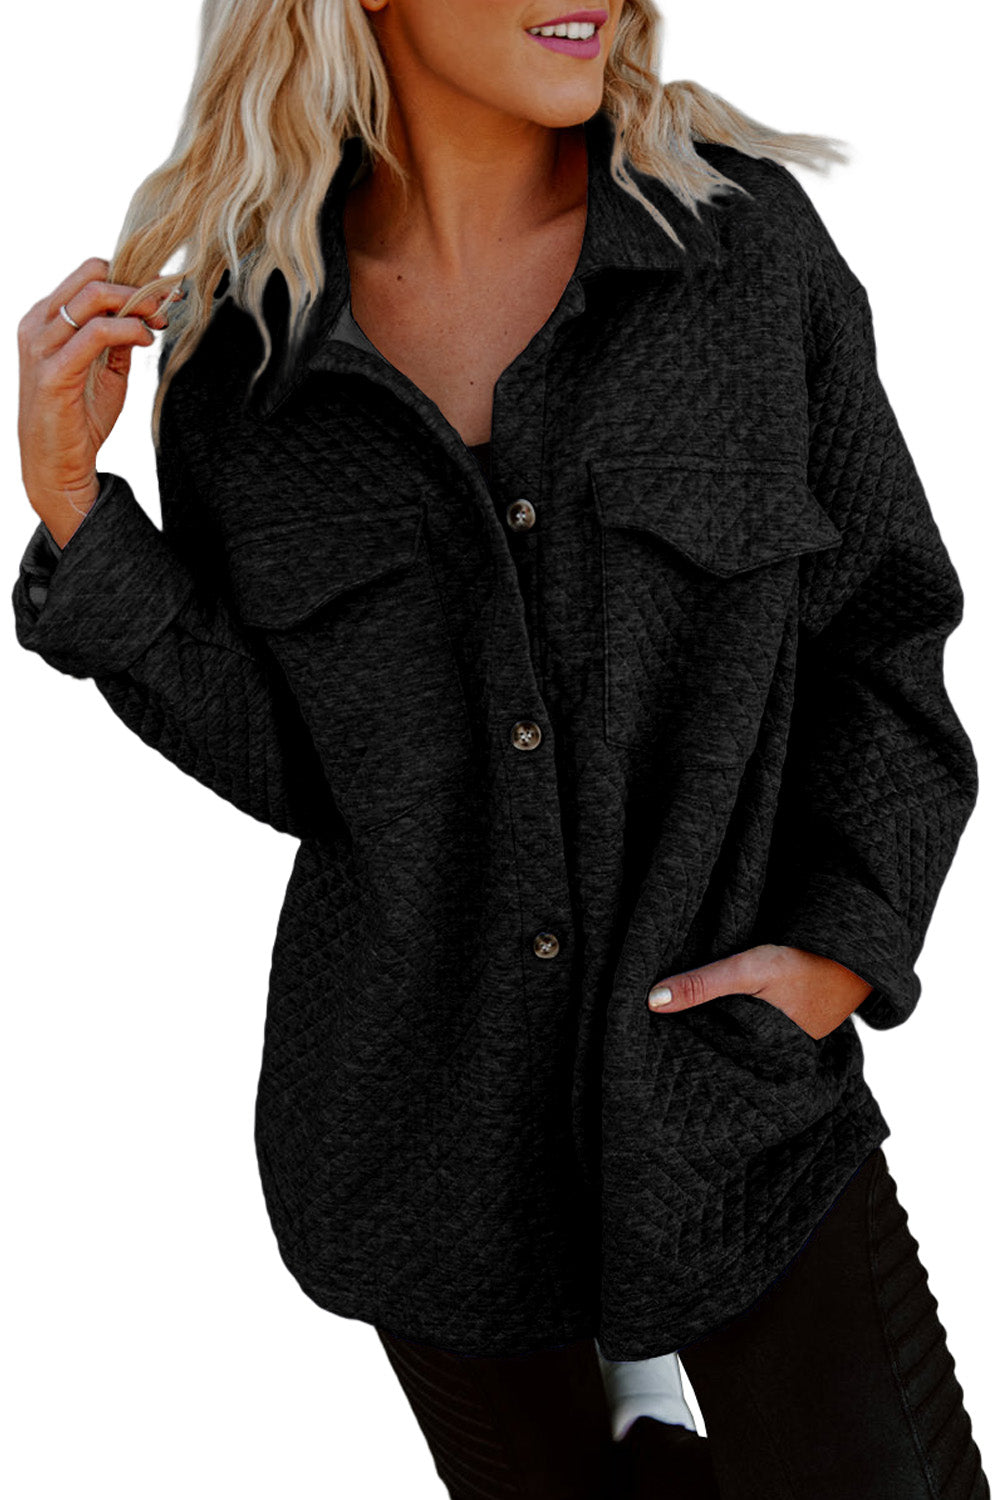 Black Retro Quilted Flap Pocket Button Shacket